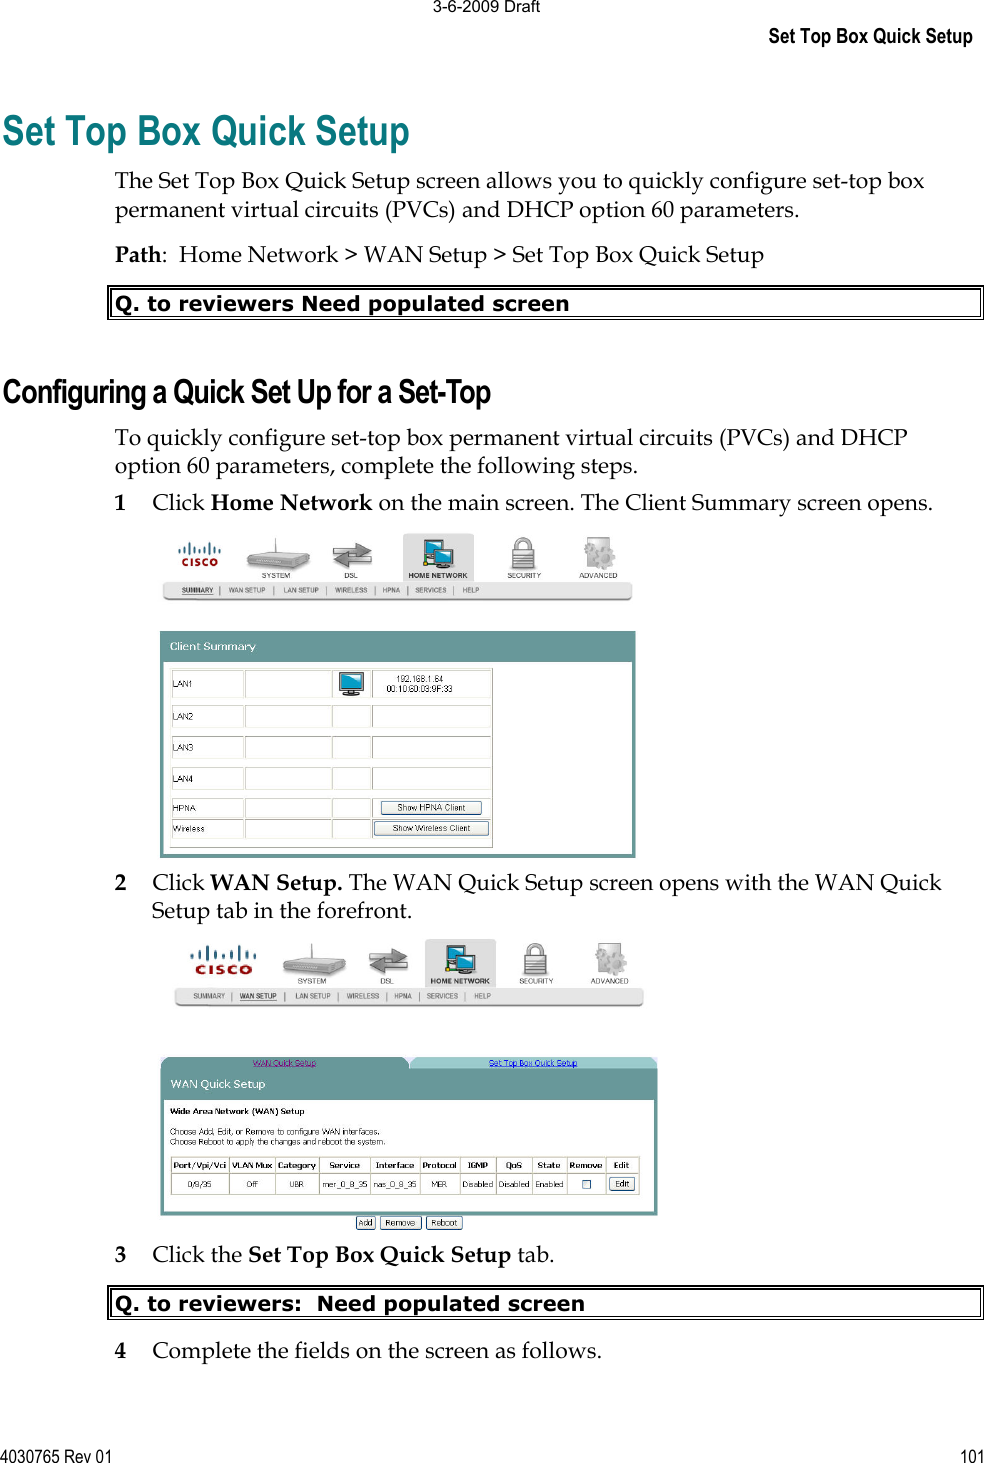 Set Top Box Quick Setup 4030765 Rev 01 101Set Top Box Quick Setup The Set Top Box Quick Setup screen allows you to quickly configure set-top box permanent virtual circuits (PVCs) and DHCP option 60 parameters. Path:  Home Network &gt; WAN Setup &gt; Set Top Box Quick Setup Q. to reviewers Need populated screen Configuring a Quick Set Up for a Set-Top To quickly configure set-top box permanent virtual circuits (PVCs) and DHCP option 60 parameters, complete the following steps. 1Click Home Network on the main screen. The Client Summary screen opens. 2Click WAN Setup. The WAN Quick Setup screen opens with the WAN Quick Setup tab in the forefront. 3Click the Set Top Box Quick Setup tab. Q. to reviewers:  Need populated screen 4Complete the fields on the screen as follows. 3-6-2009 Draft